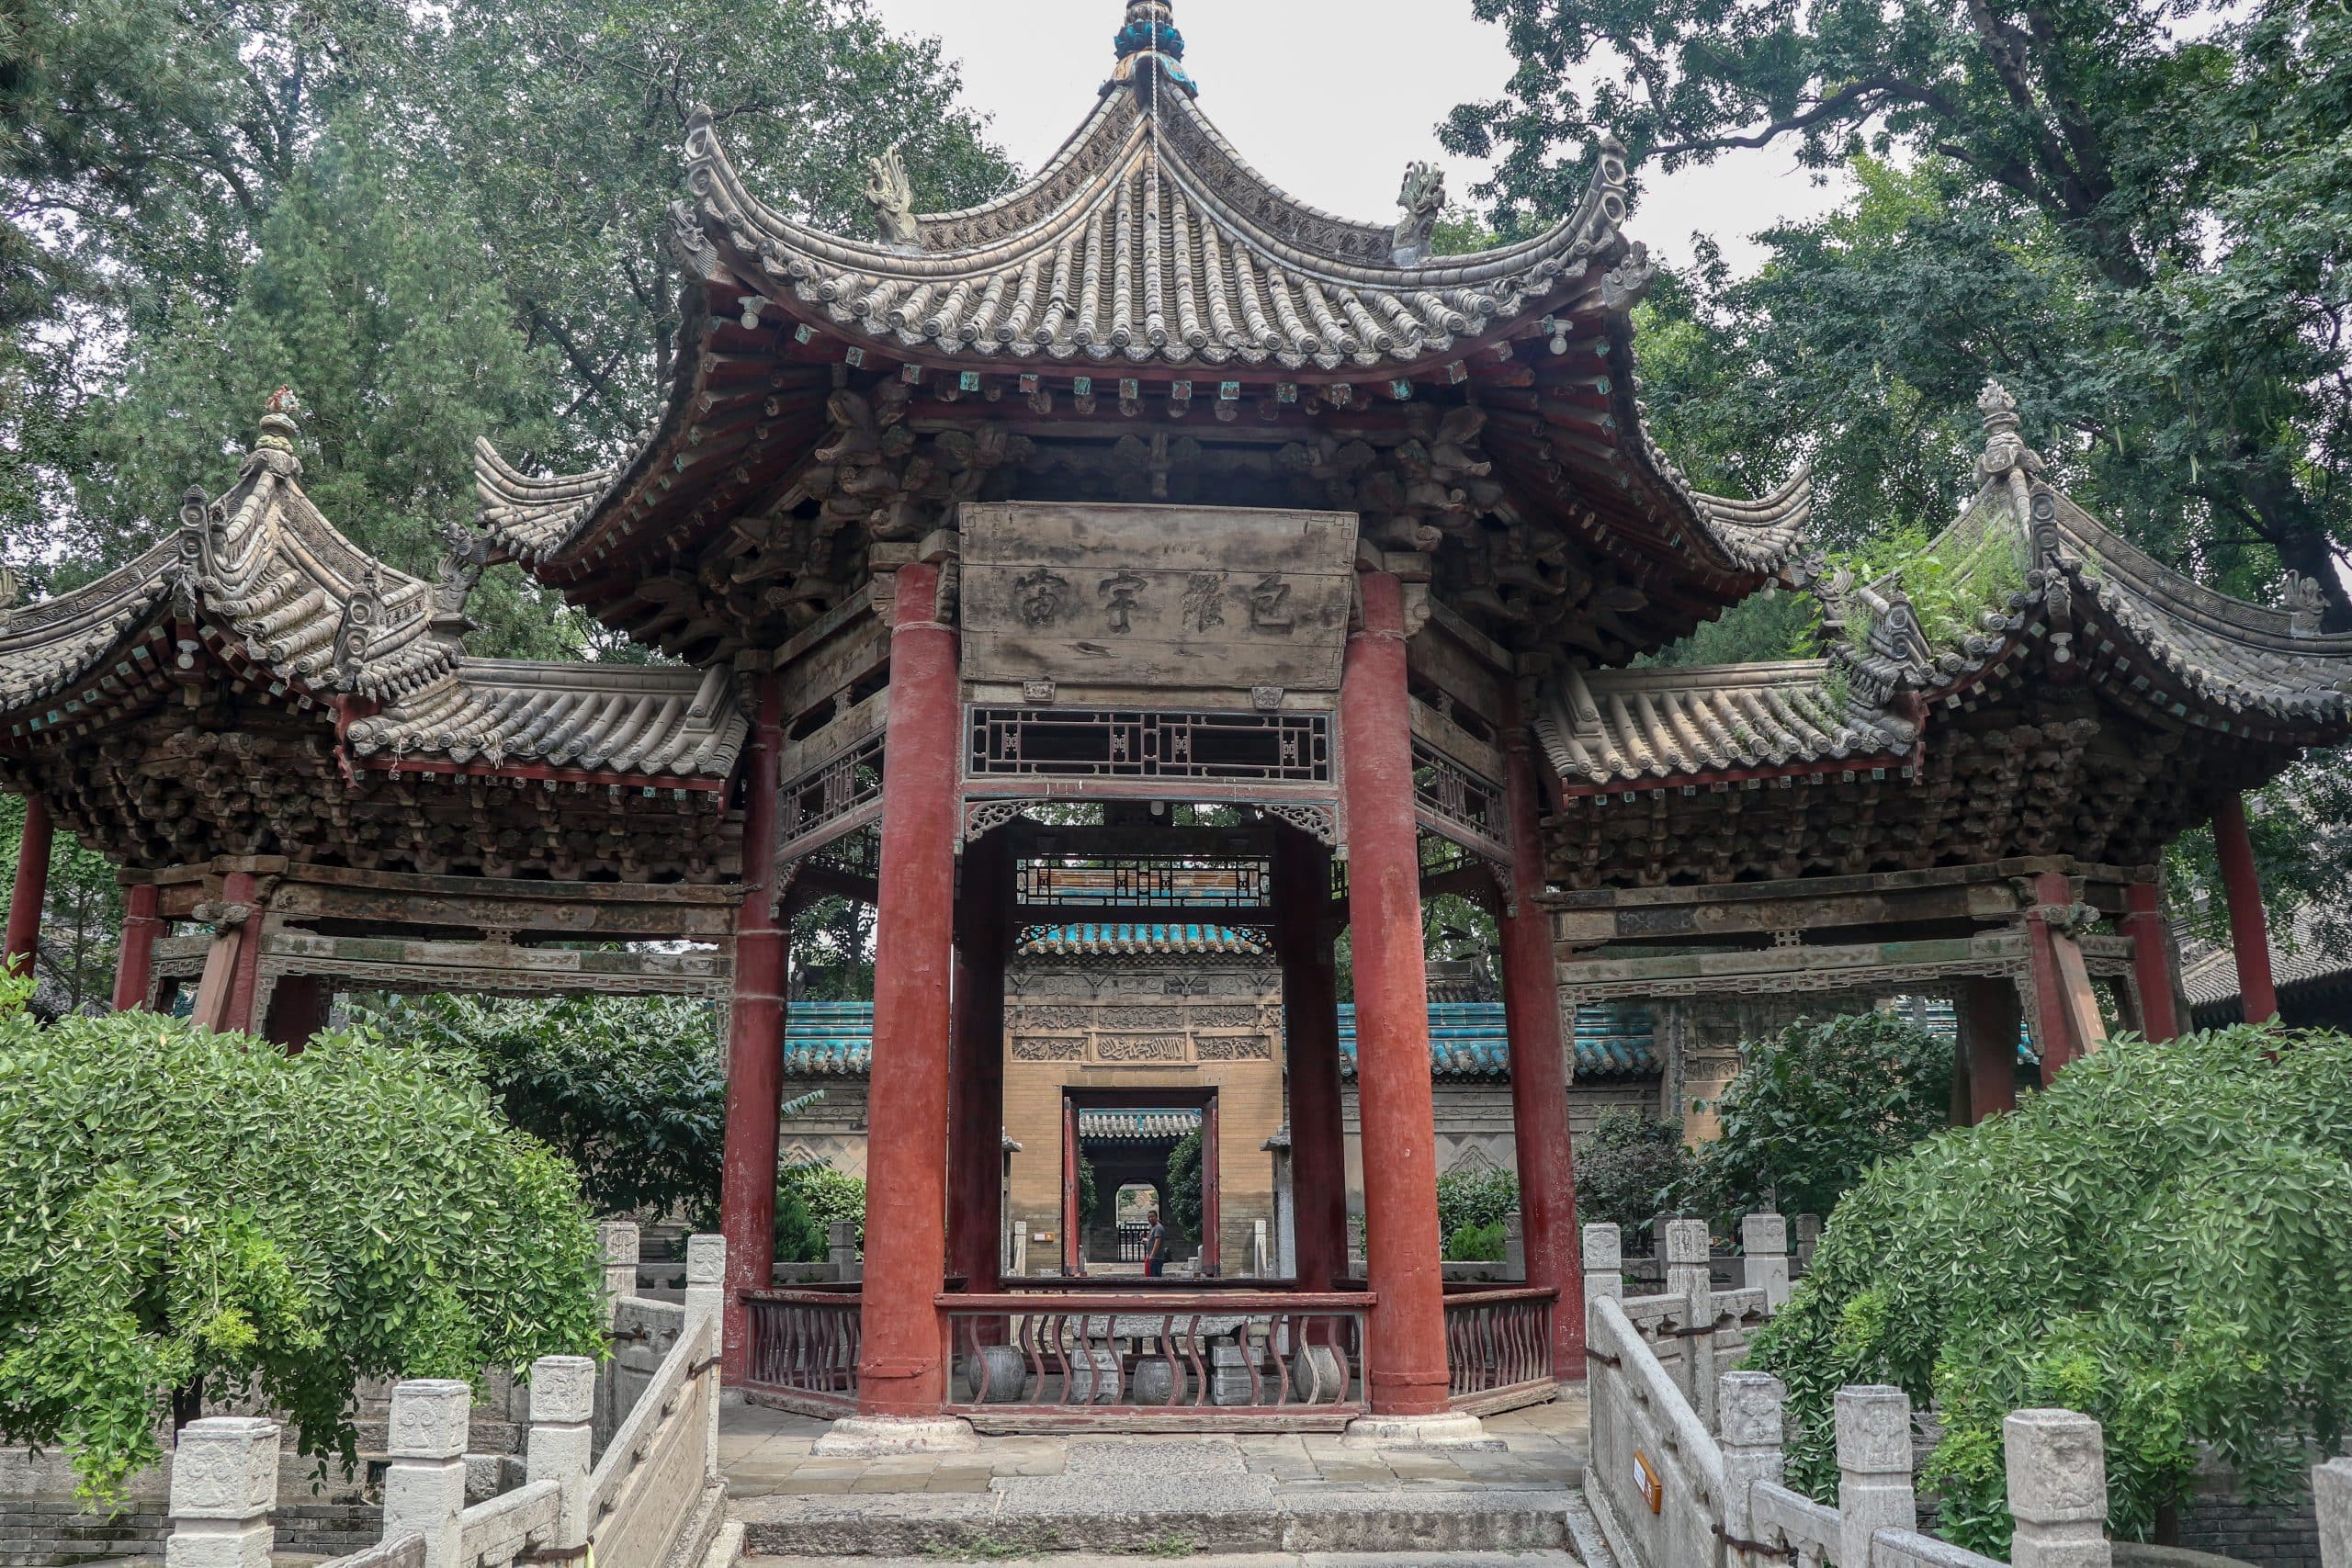 The Great Xi'an Mosque